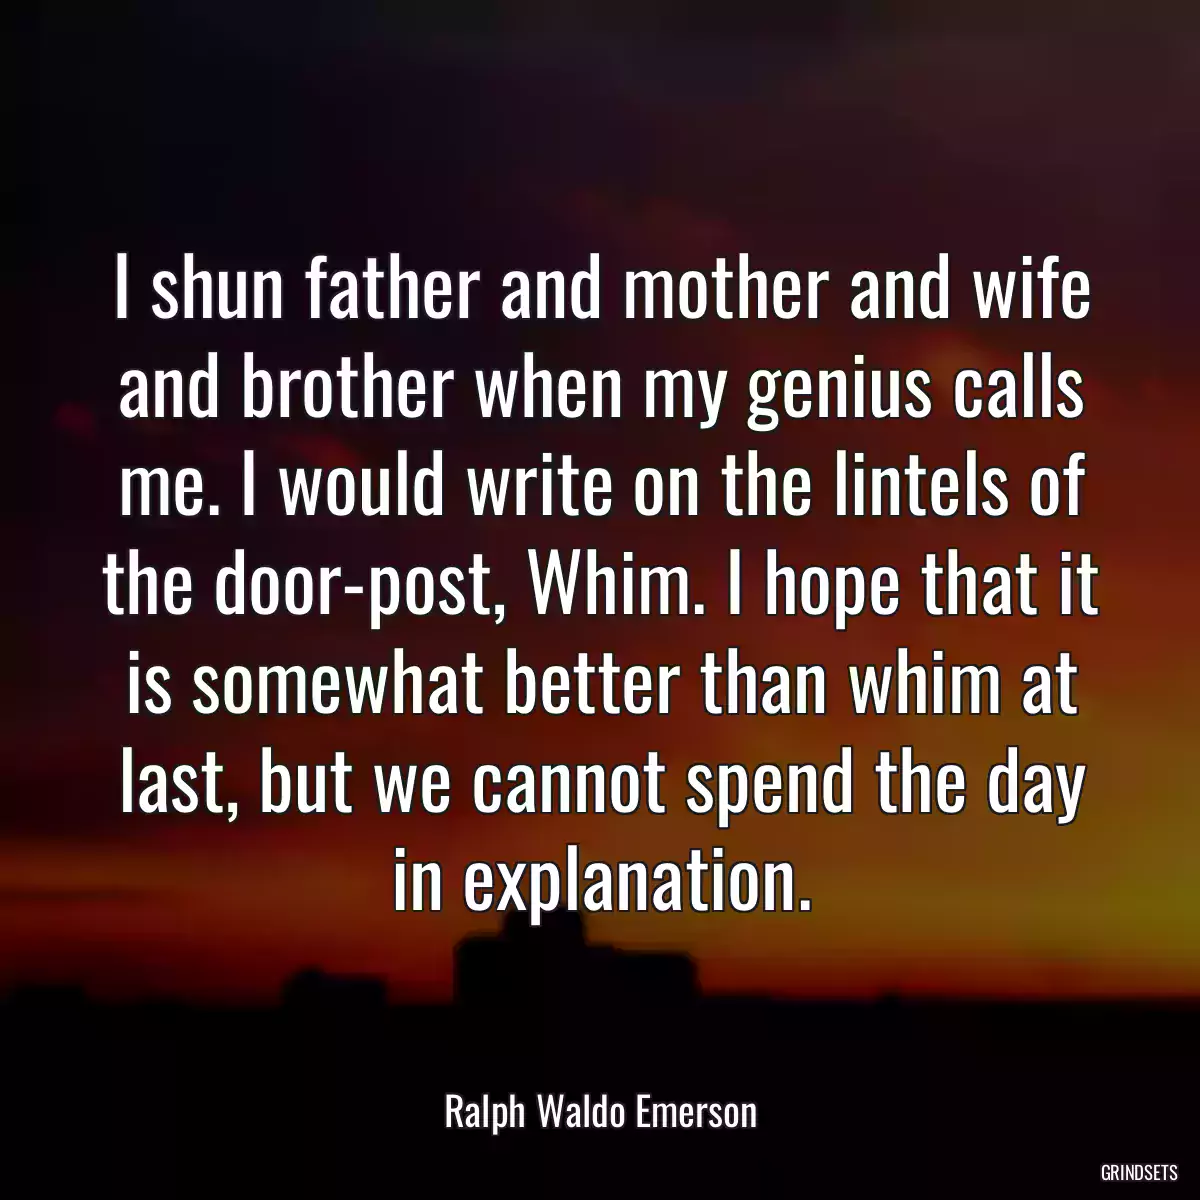 I shun father and mother and wife and brother when my genius calls me. I would write on the lintels of the door-post, Whim. I hope that it is somewhat better than whim at last, but we cannot spend the day in explanation.